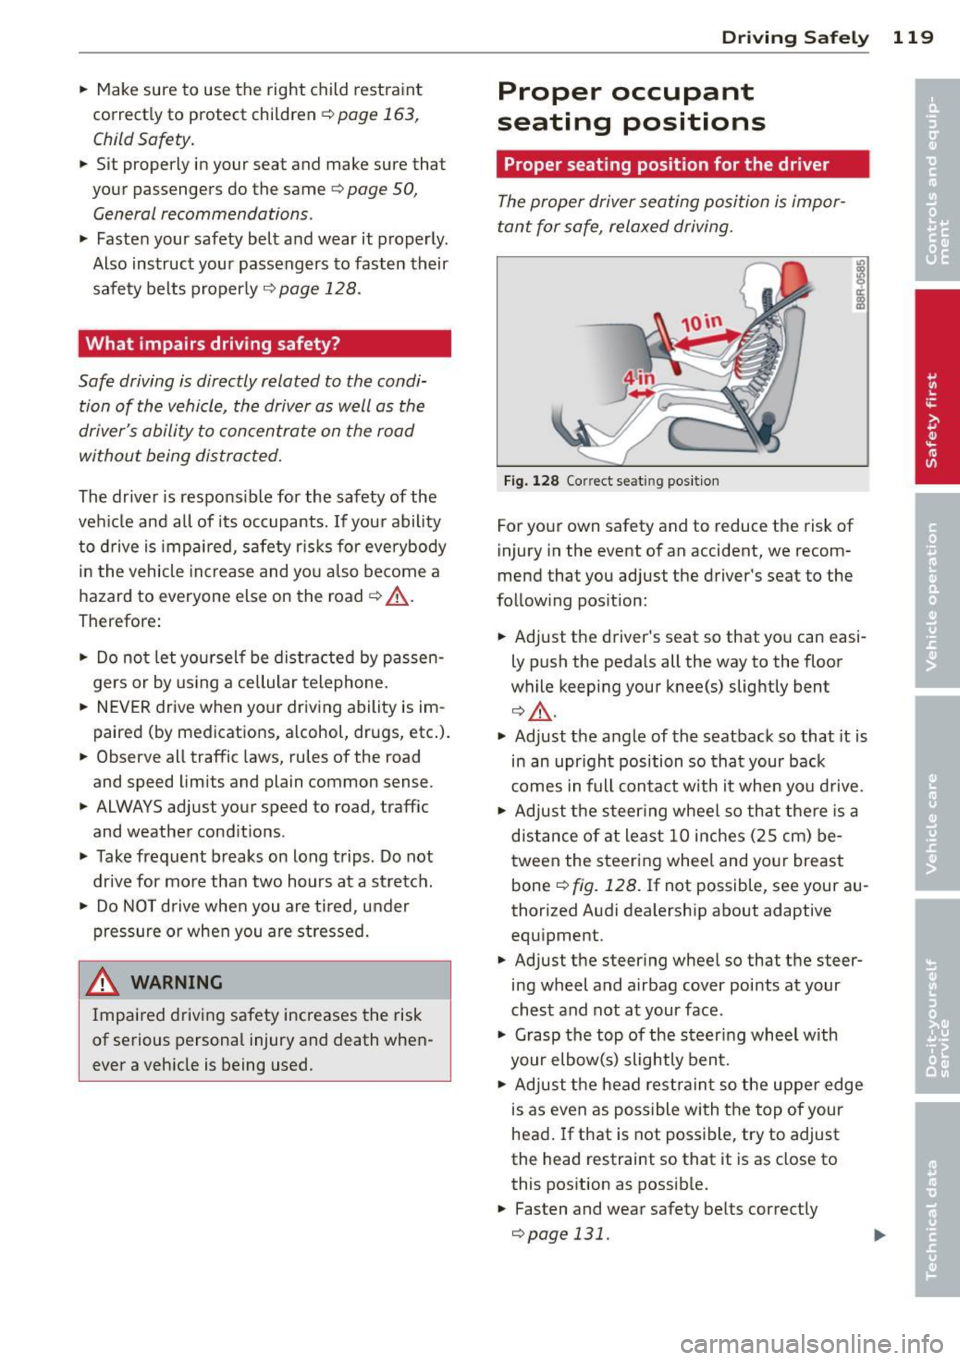 AUDI S7 2012  Owners Manual .. Make sure  to  use  the  right  child  restraint 
correct ly to  protect  children 
Q page  163, 
Child Safety. 
..  Sit  properly  in your  seat  and  make  sure  that 
your  passengers  do  the  